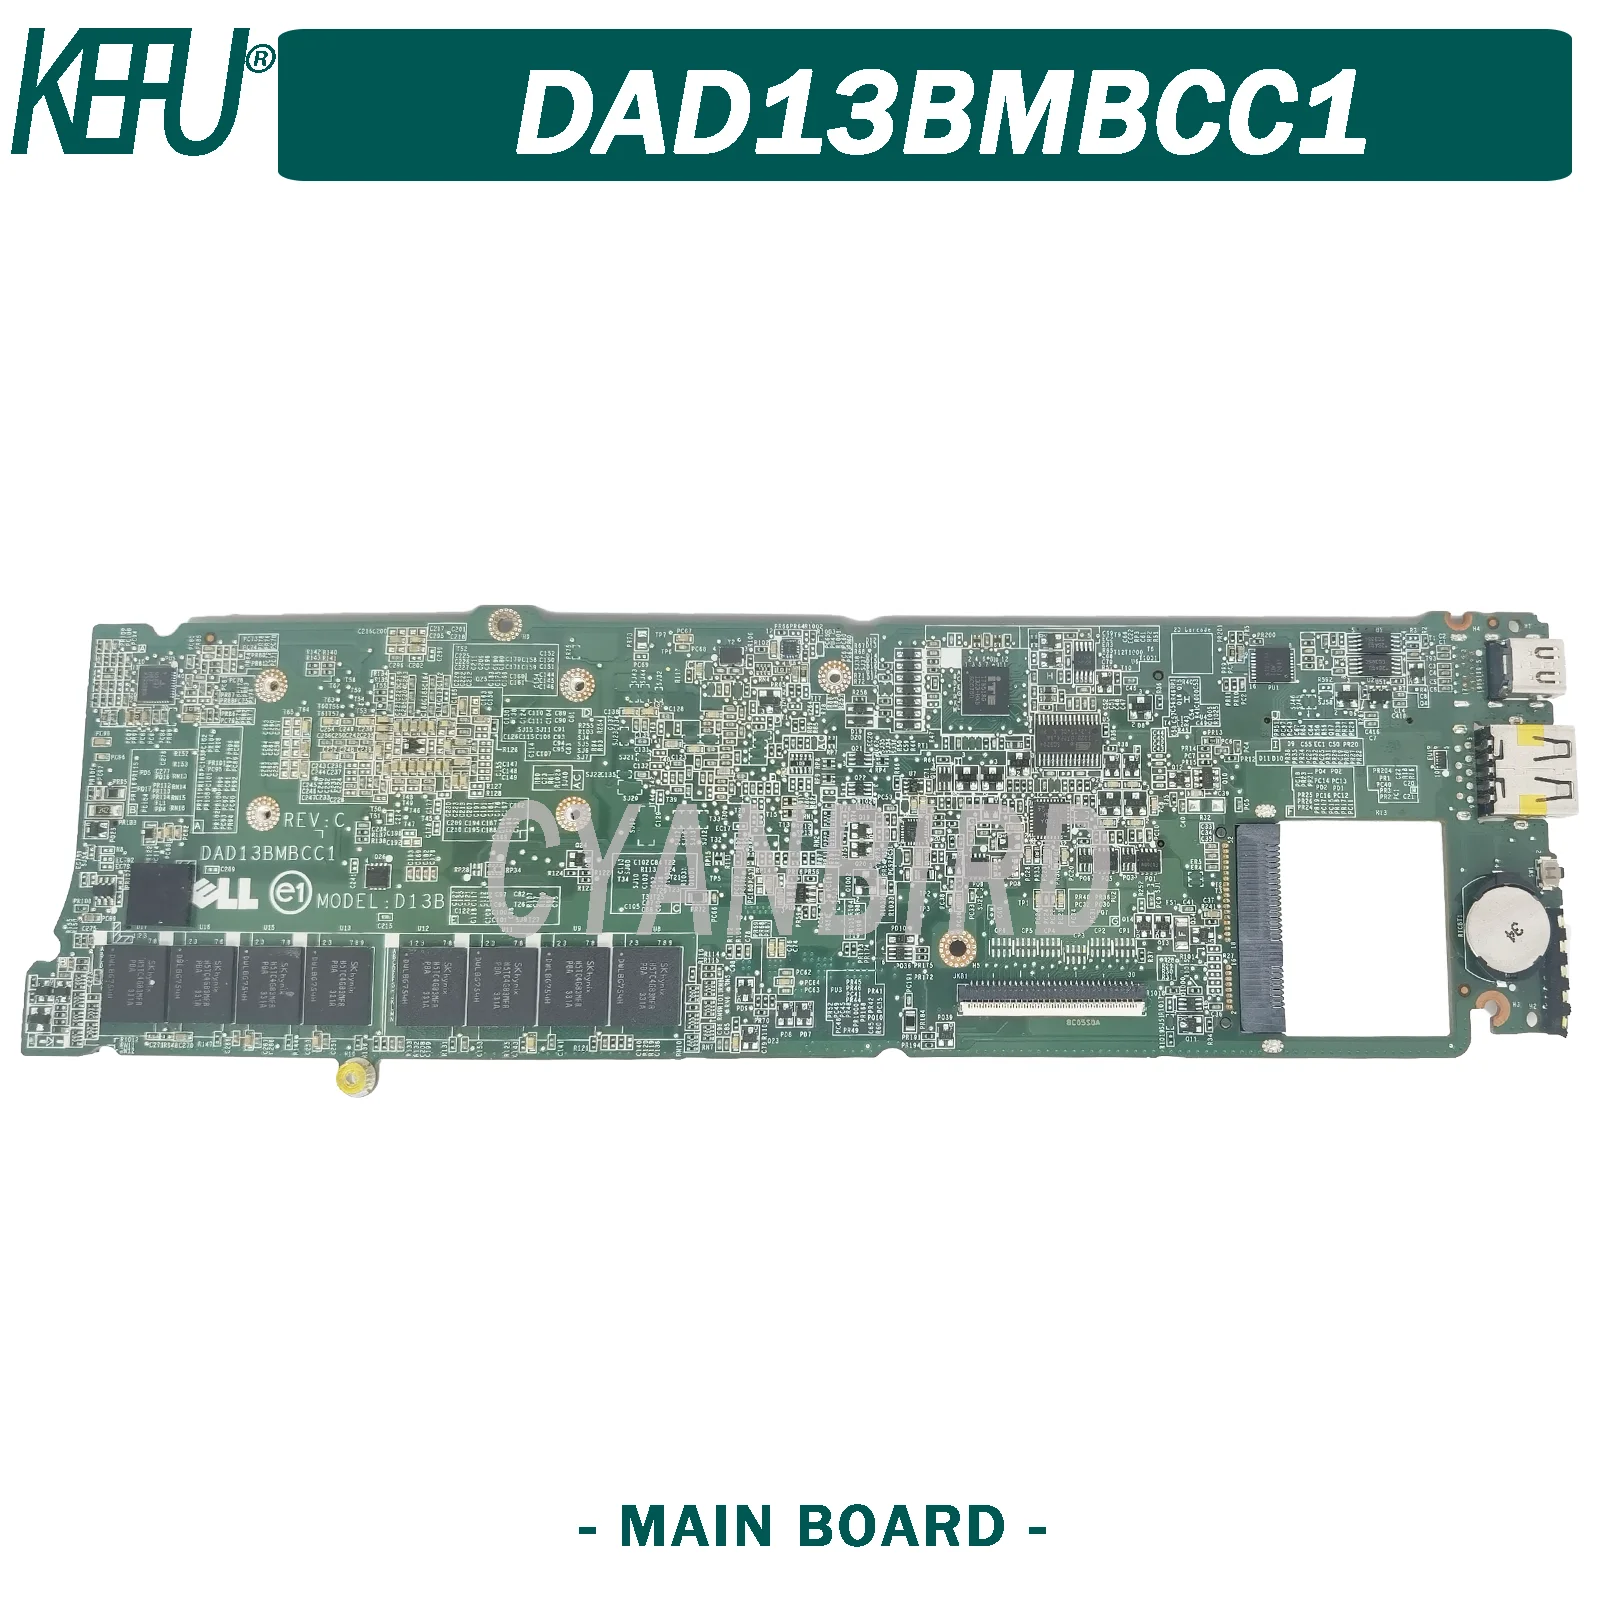 kefu dad13bmbcc1 original mainboard for dell xps 13 l322x with 8gb ram i5 3337u laptop motherboard free global shipping